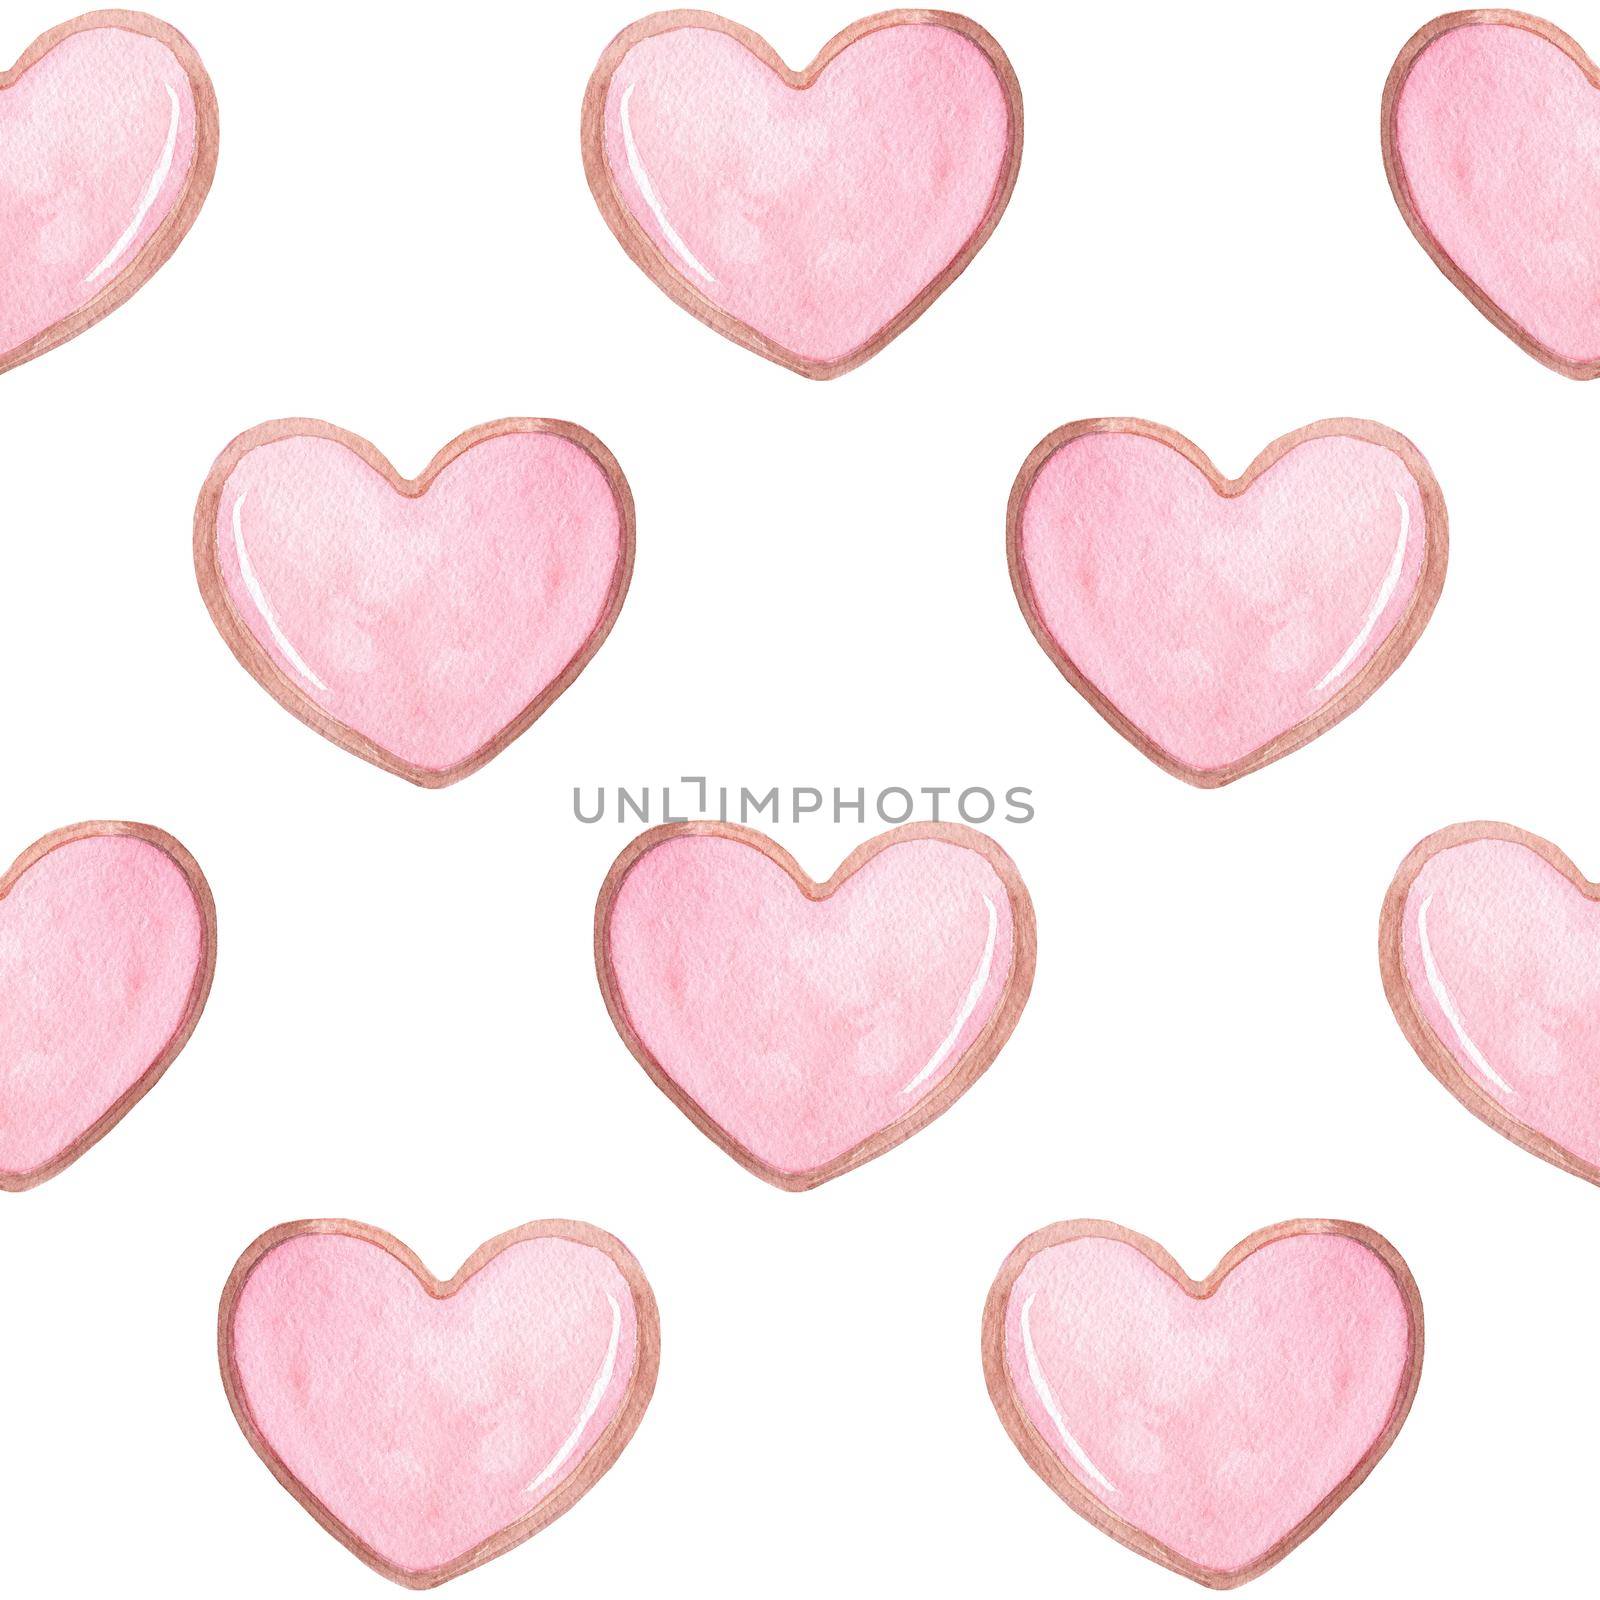 watercolor cute pink heart seamless pattern on white background for fabric,baby textile, scrapbooking, wrapping paper,invitations by dreamloud